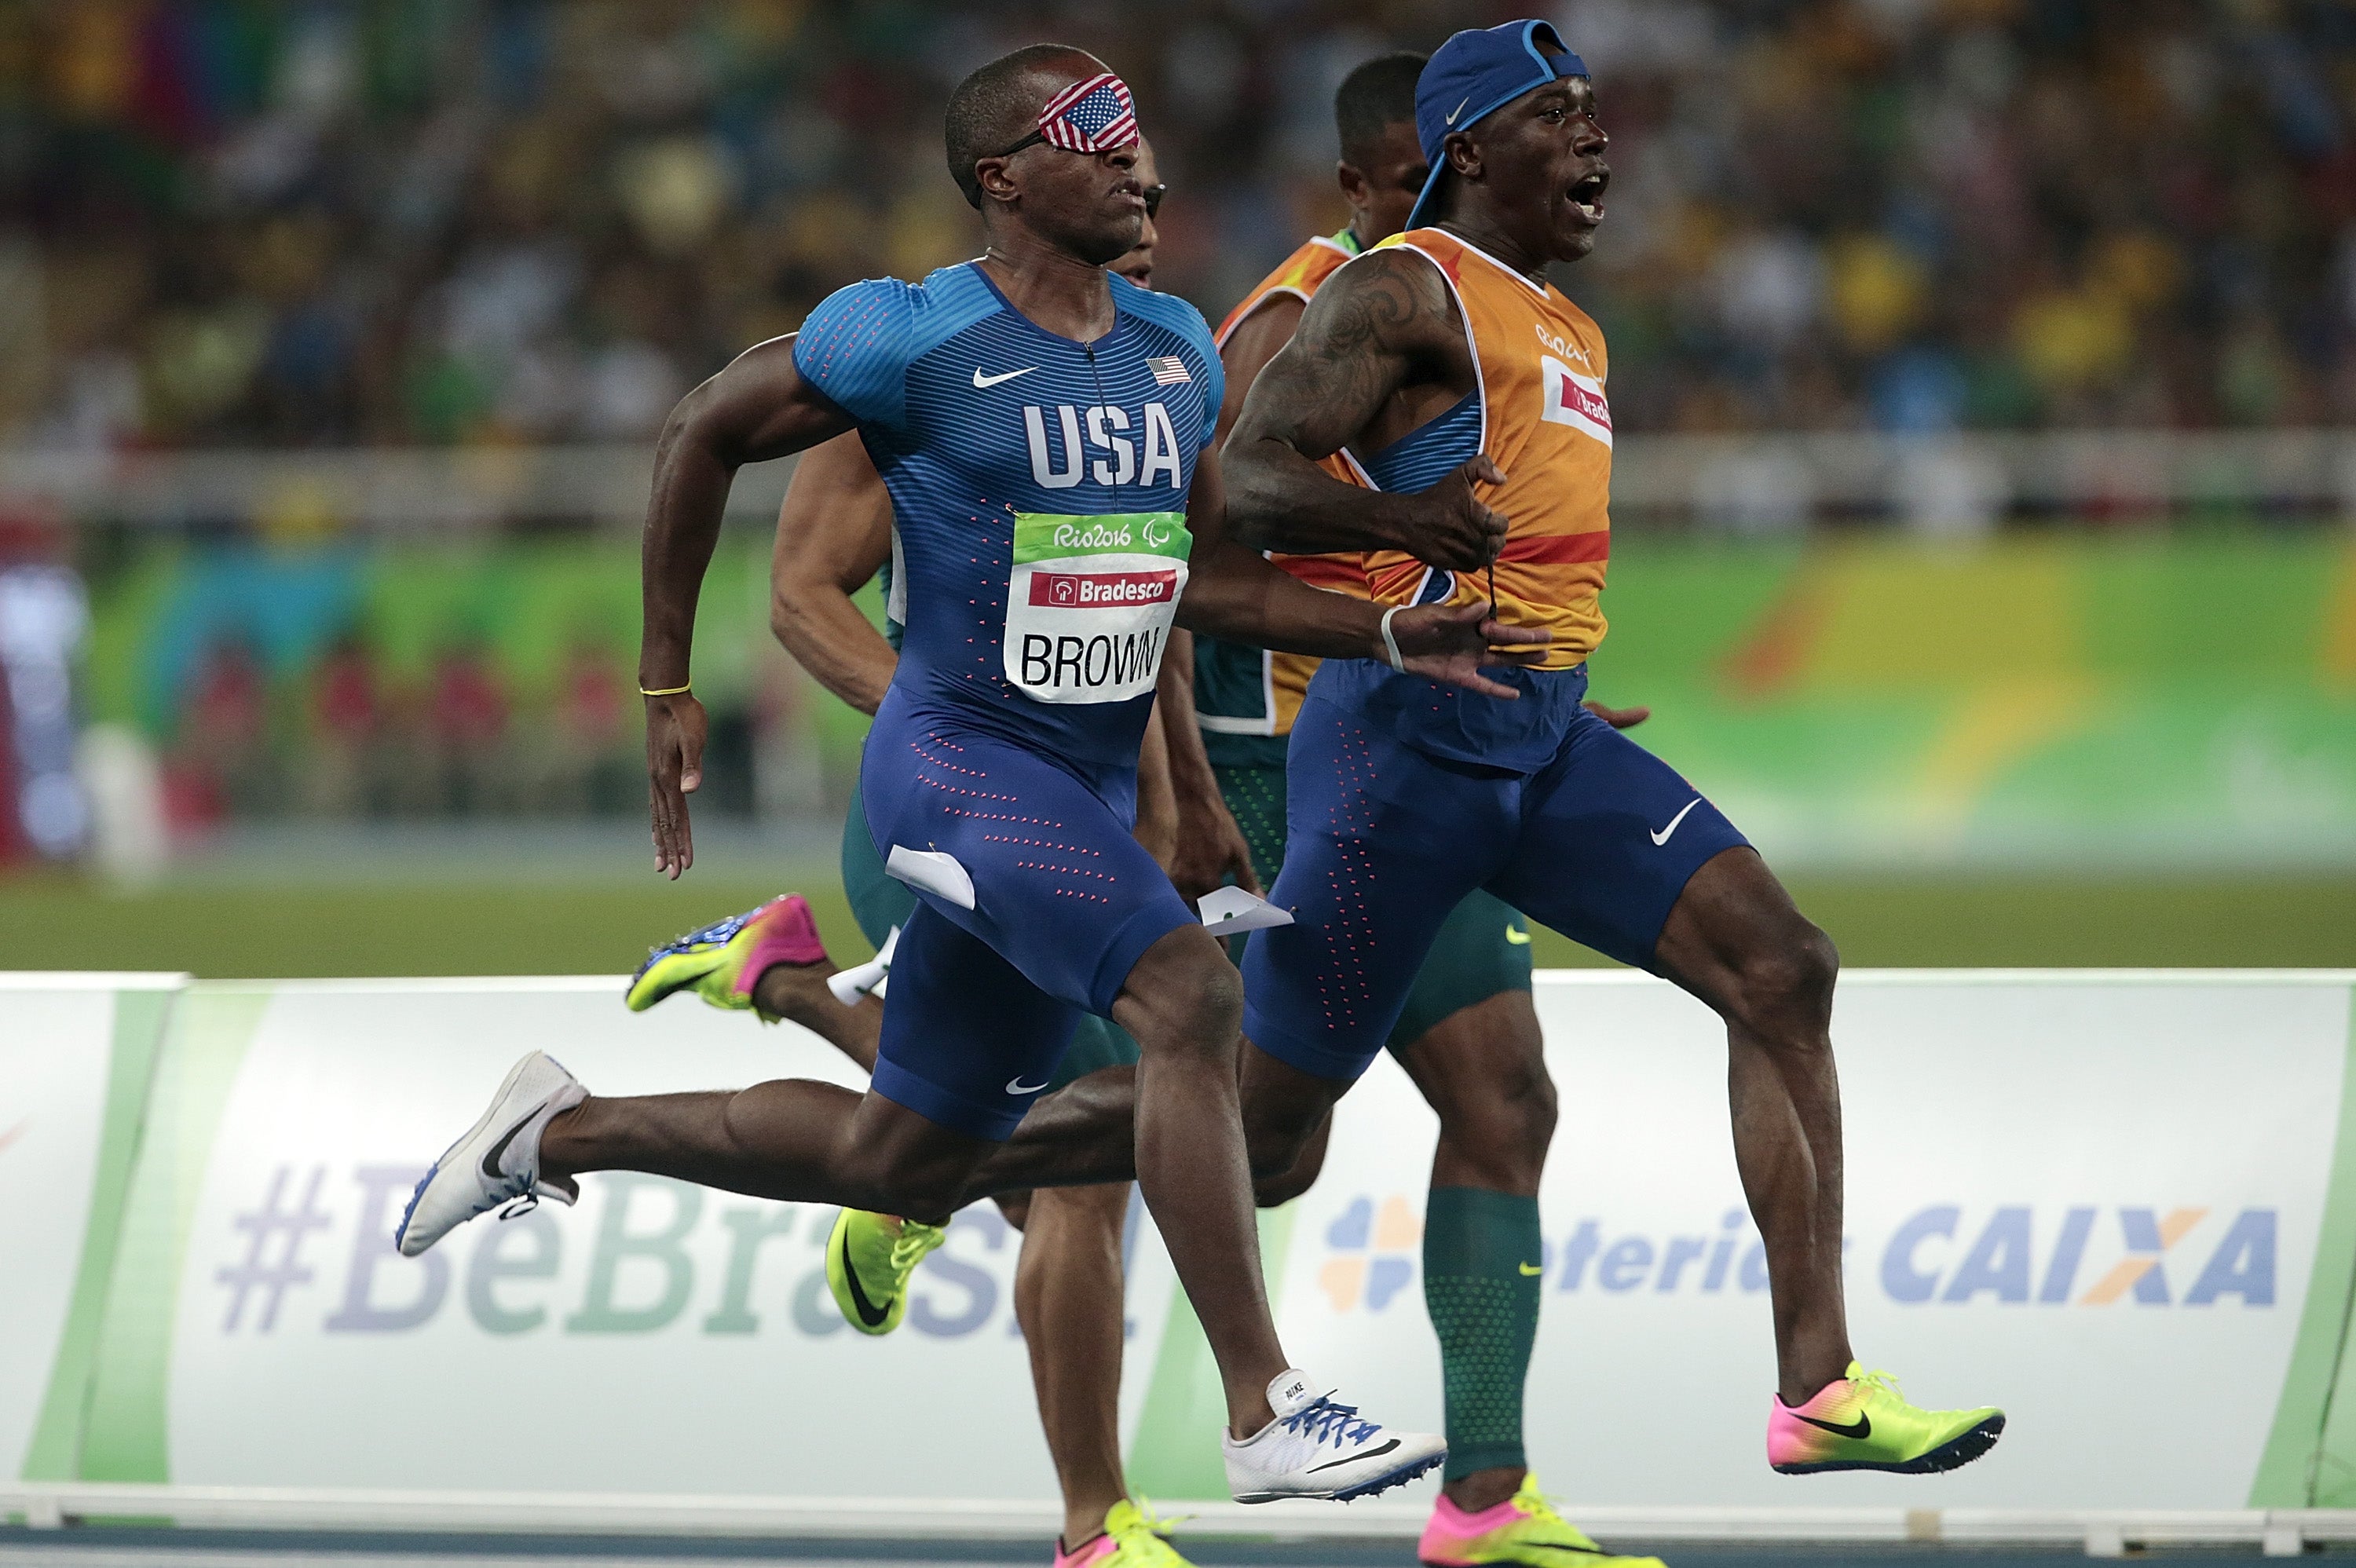 David Brown of United States competes at the Men's 100m - T11 Final during day 4 of the Rio 2016 Paralympic Games at the Olympic Stadium on 11 September 2016 in Rio de Janeiro, Brazil